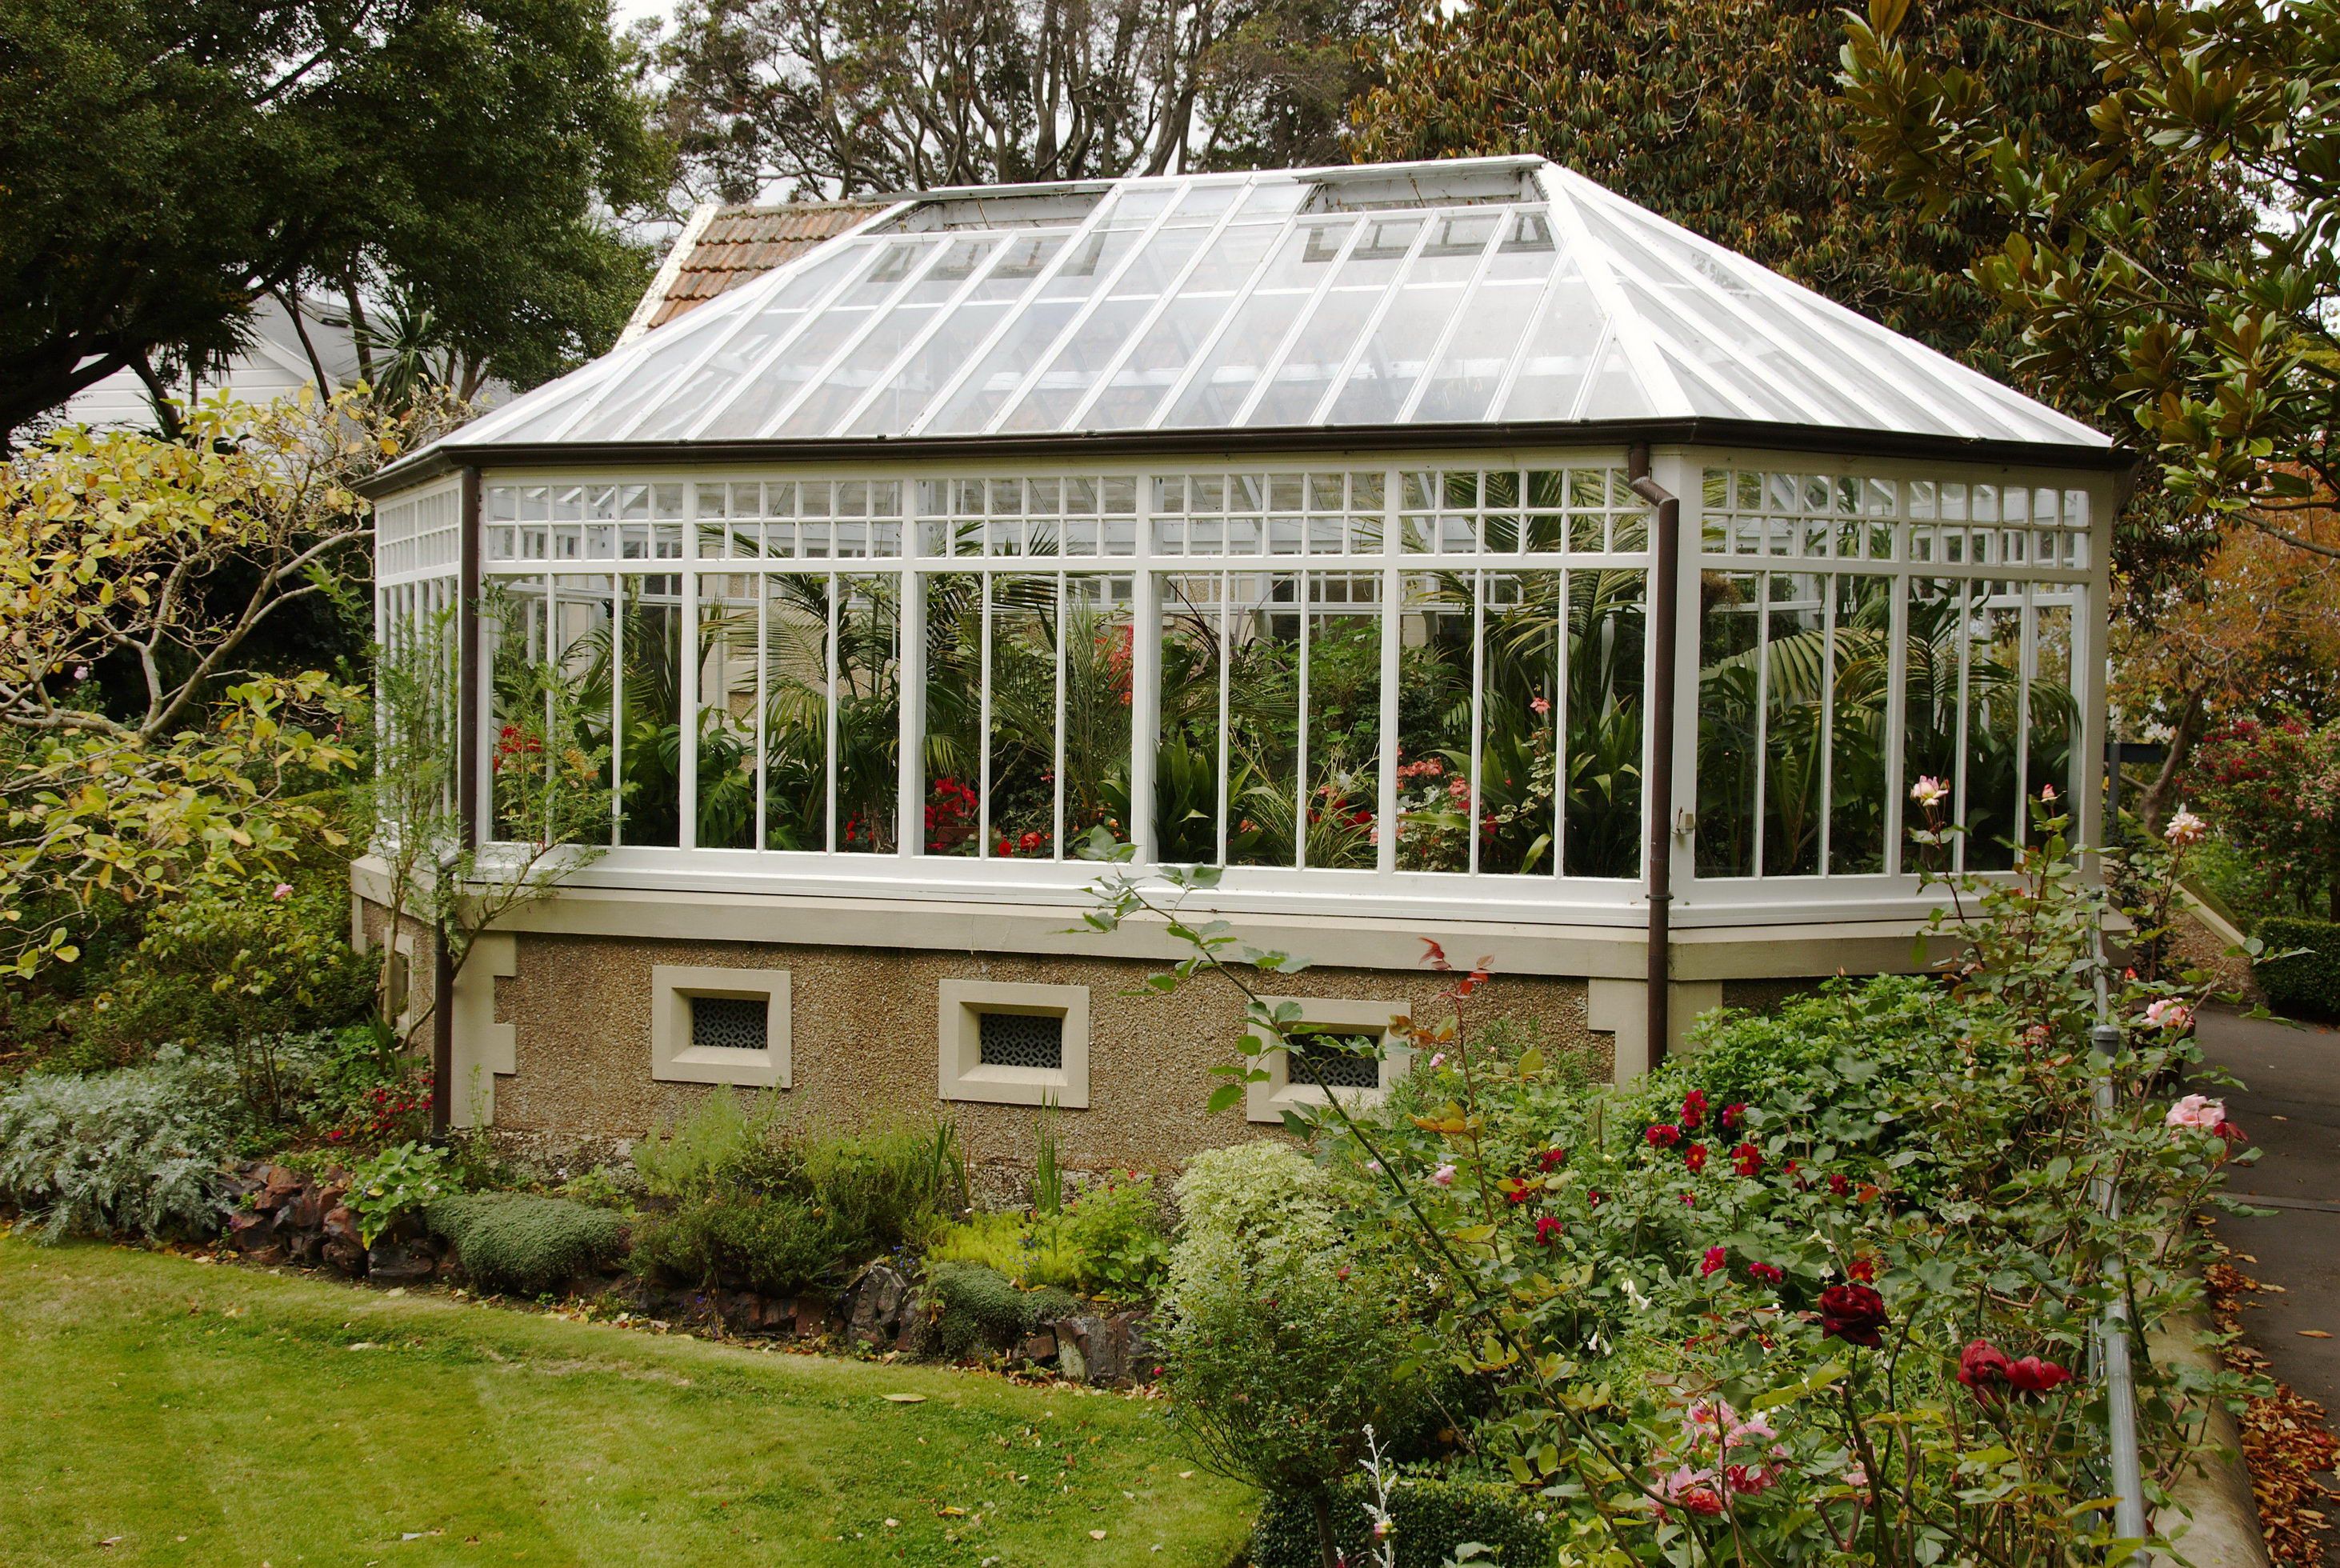 Glass gazebo structure used as a greenhouse